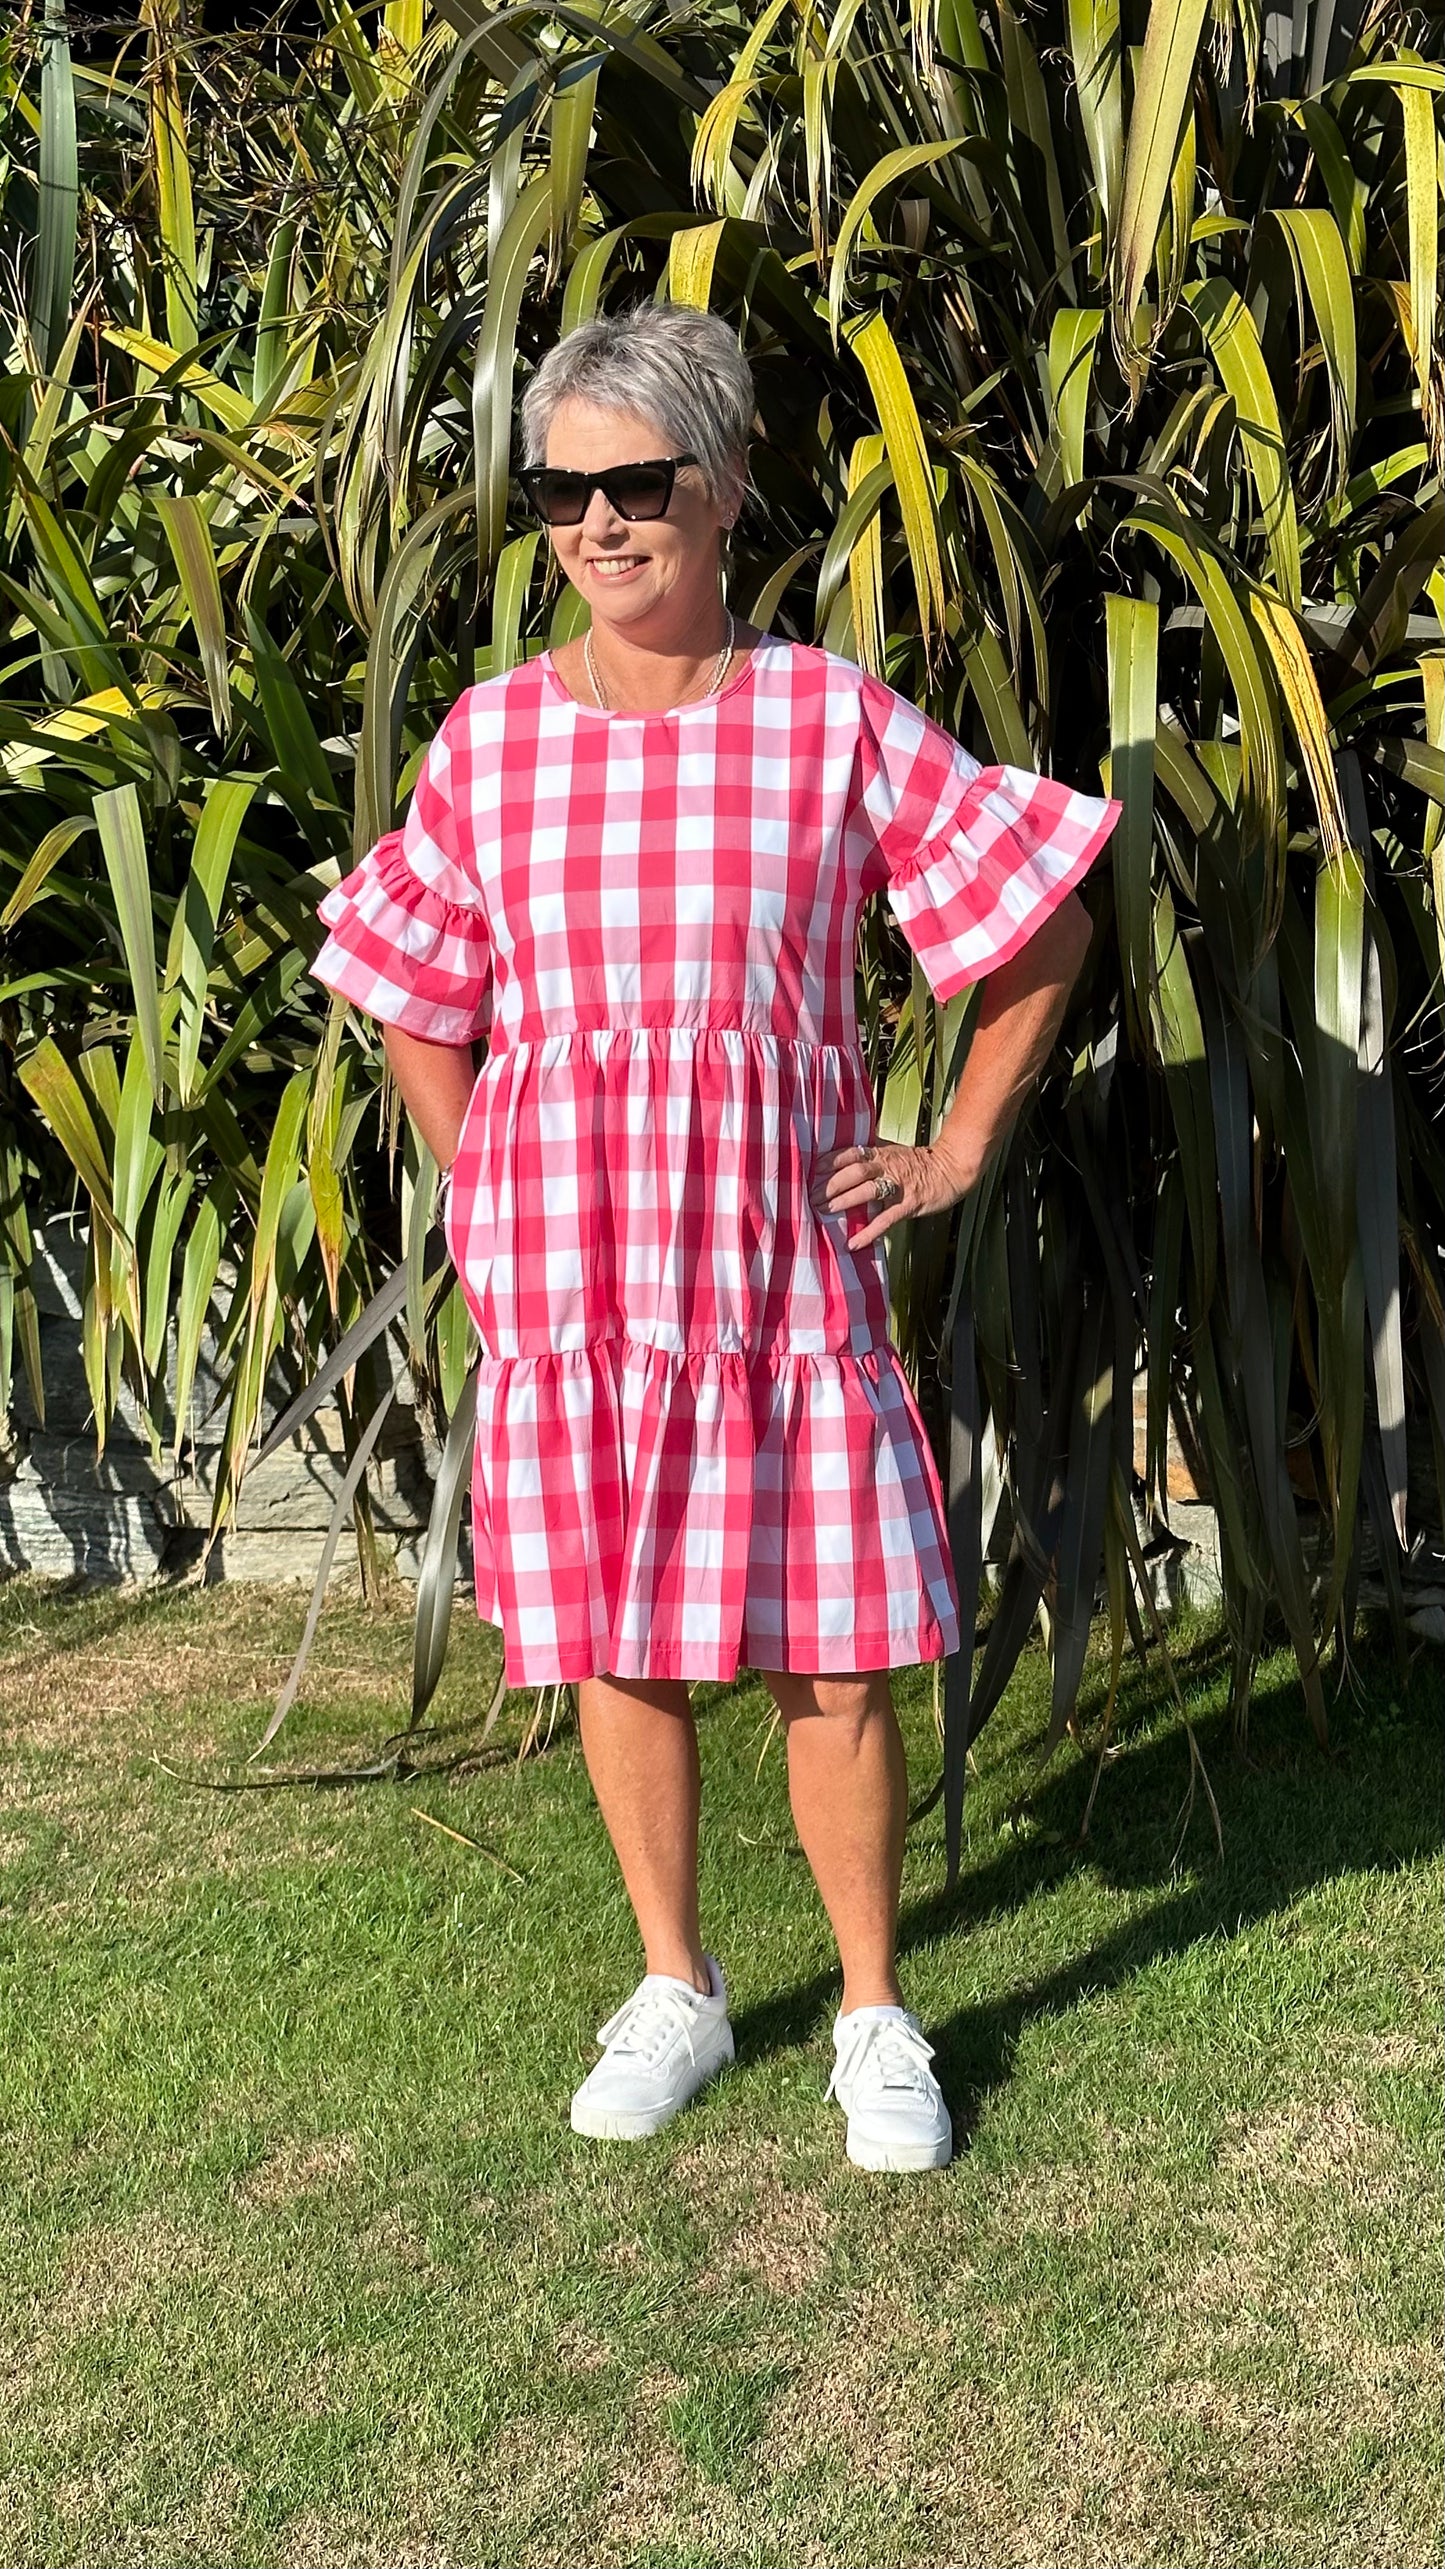 All The Frills Dress - Pink & White Check